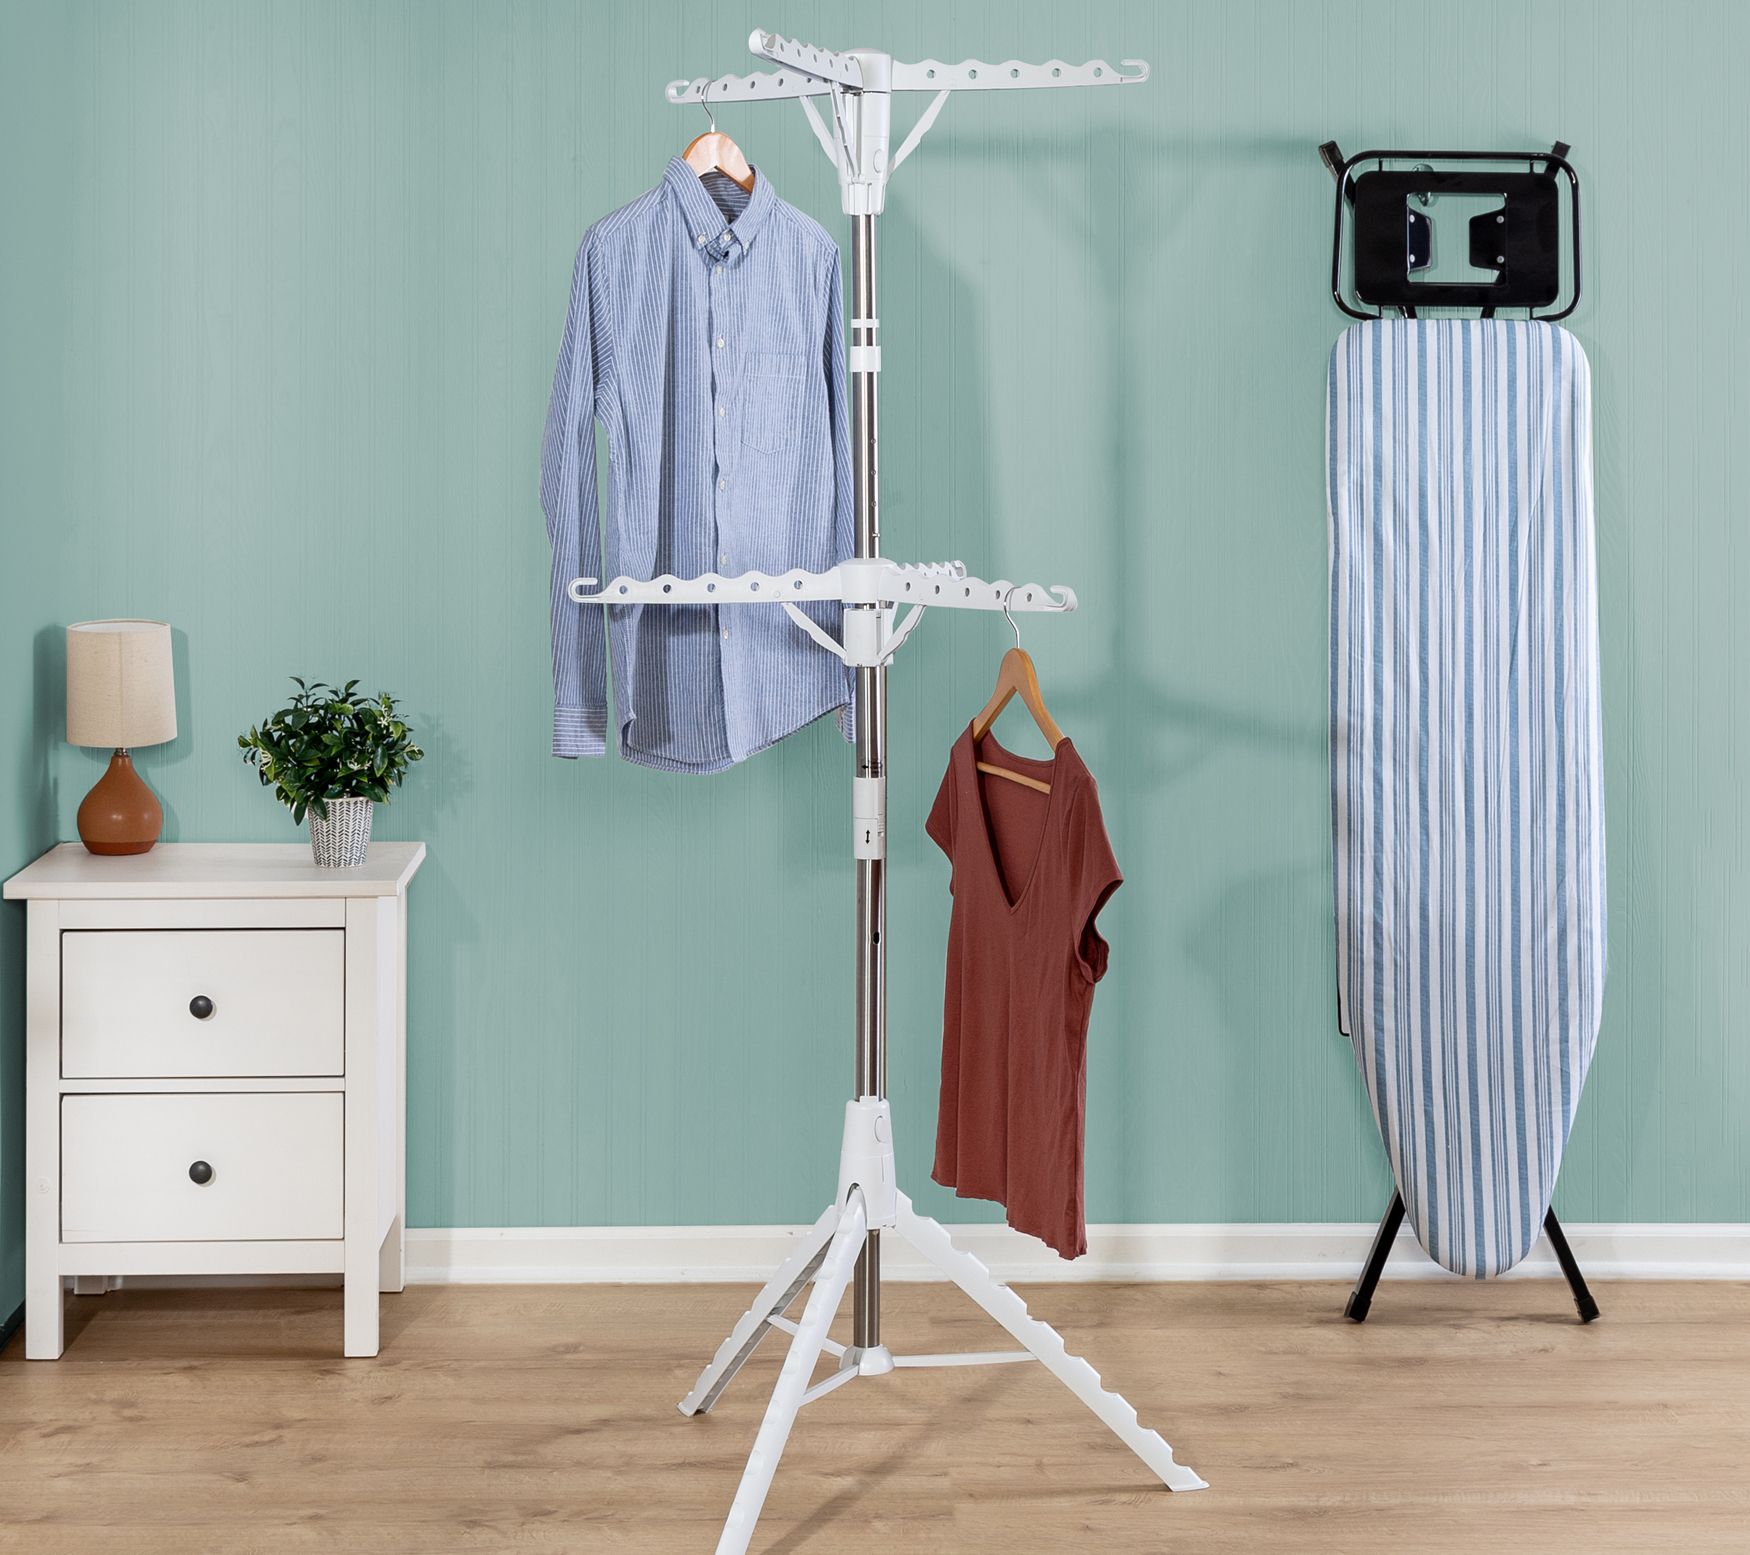 Newly Portable Electric Clothes Drying Rack Smart Hang Clothes